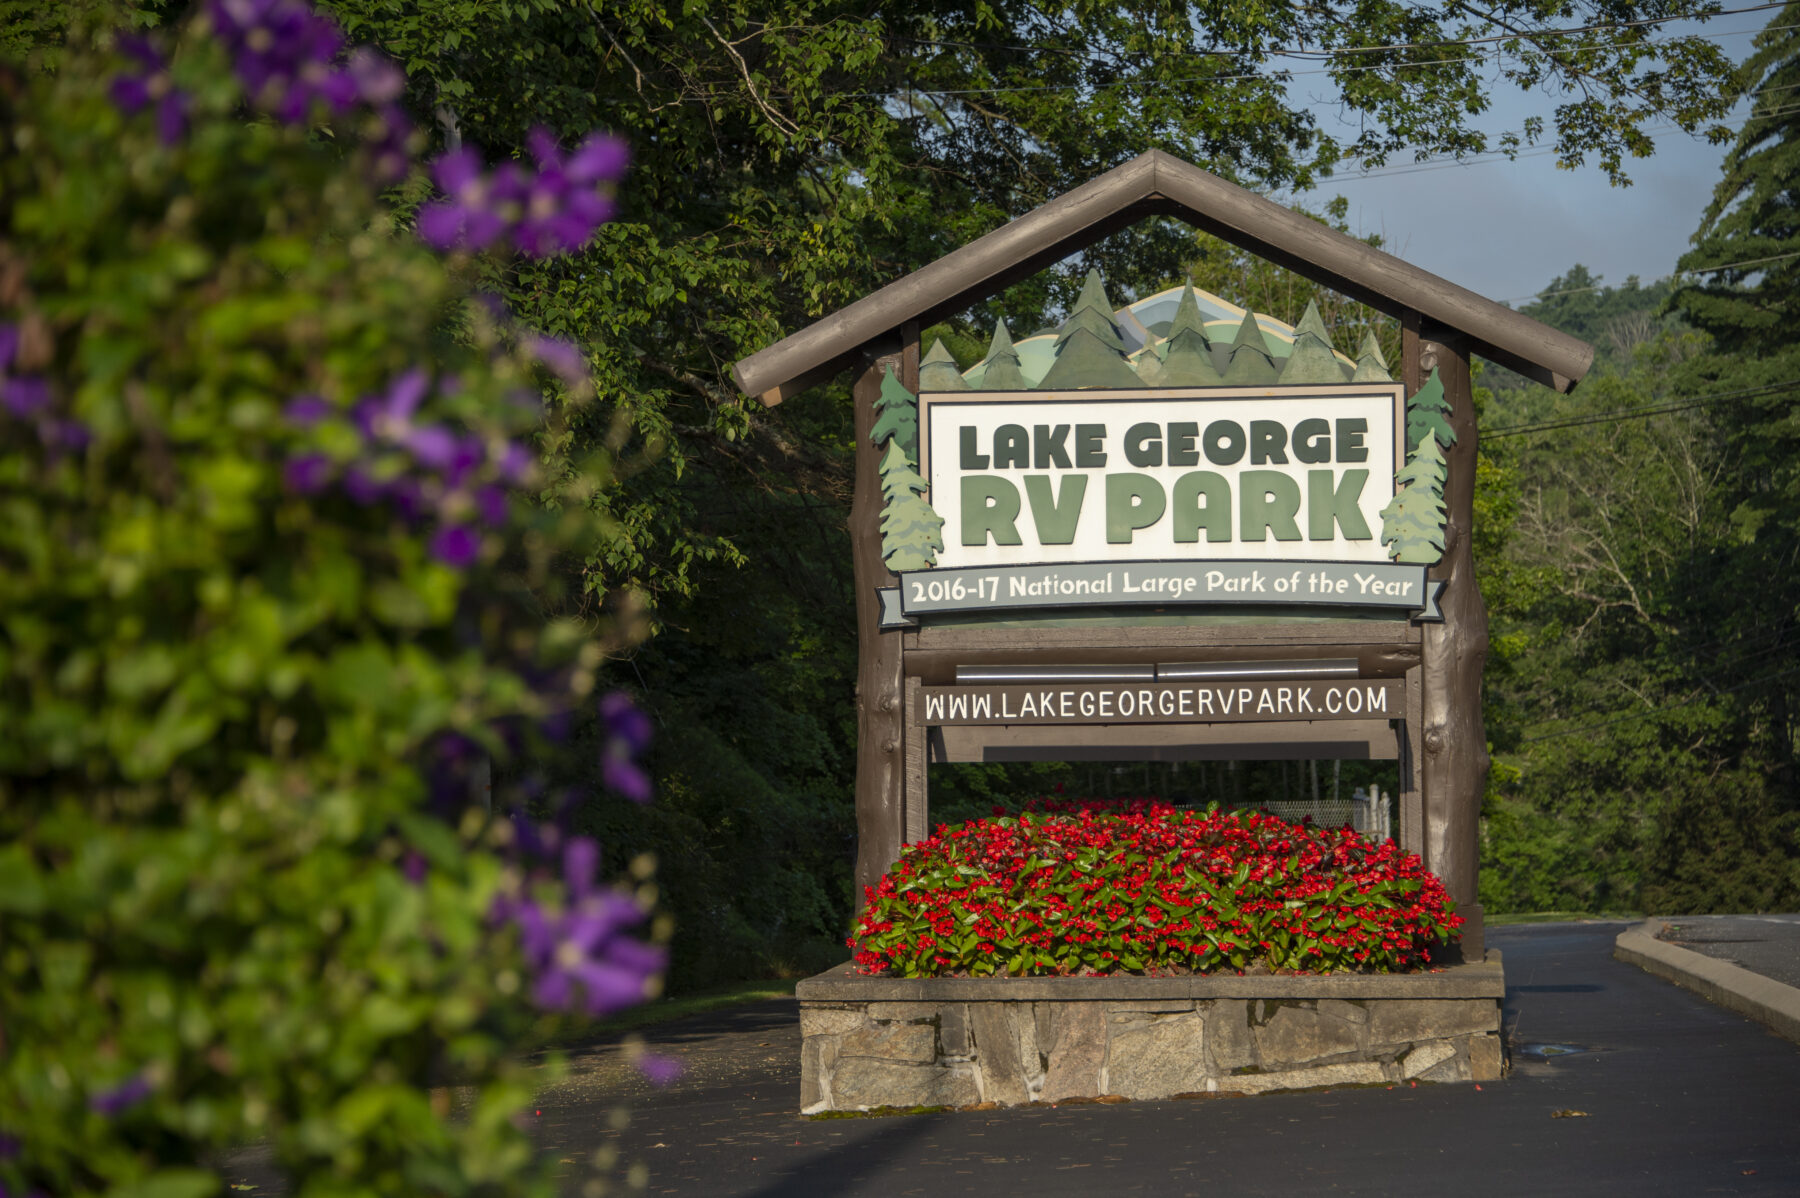 Lake George RV Park sign that can be seen out front